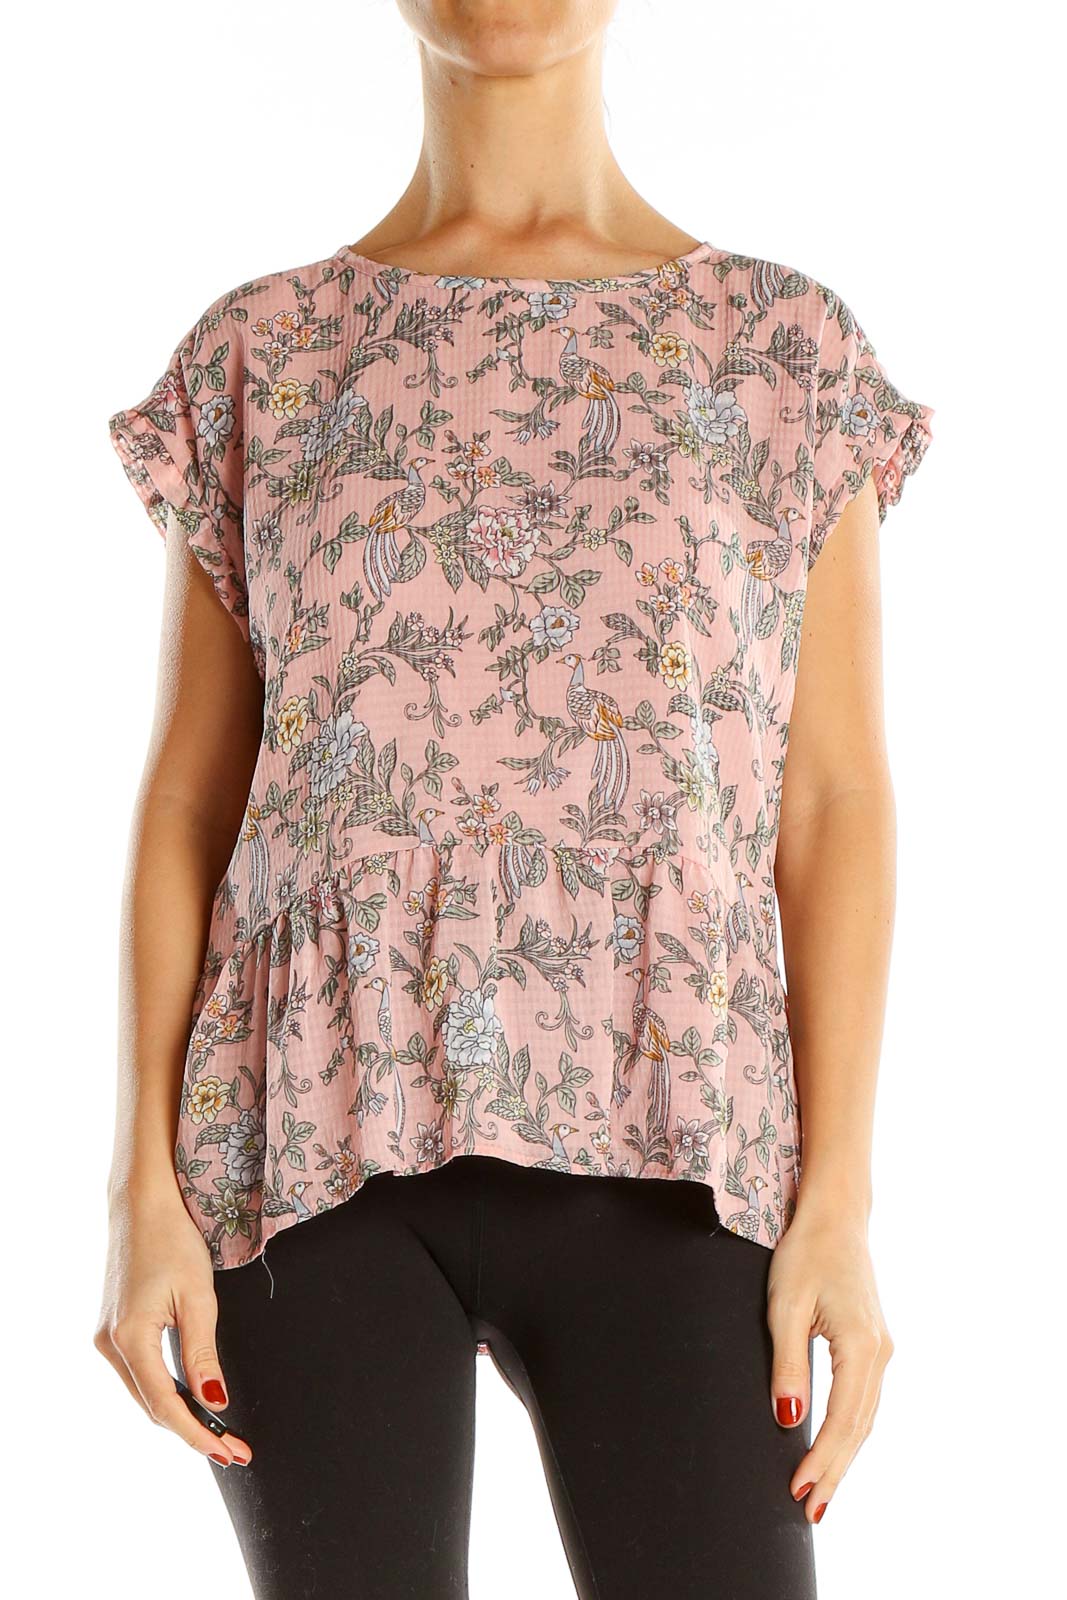 Pink Floral Print Chic Blouse Front